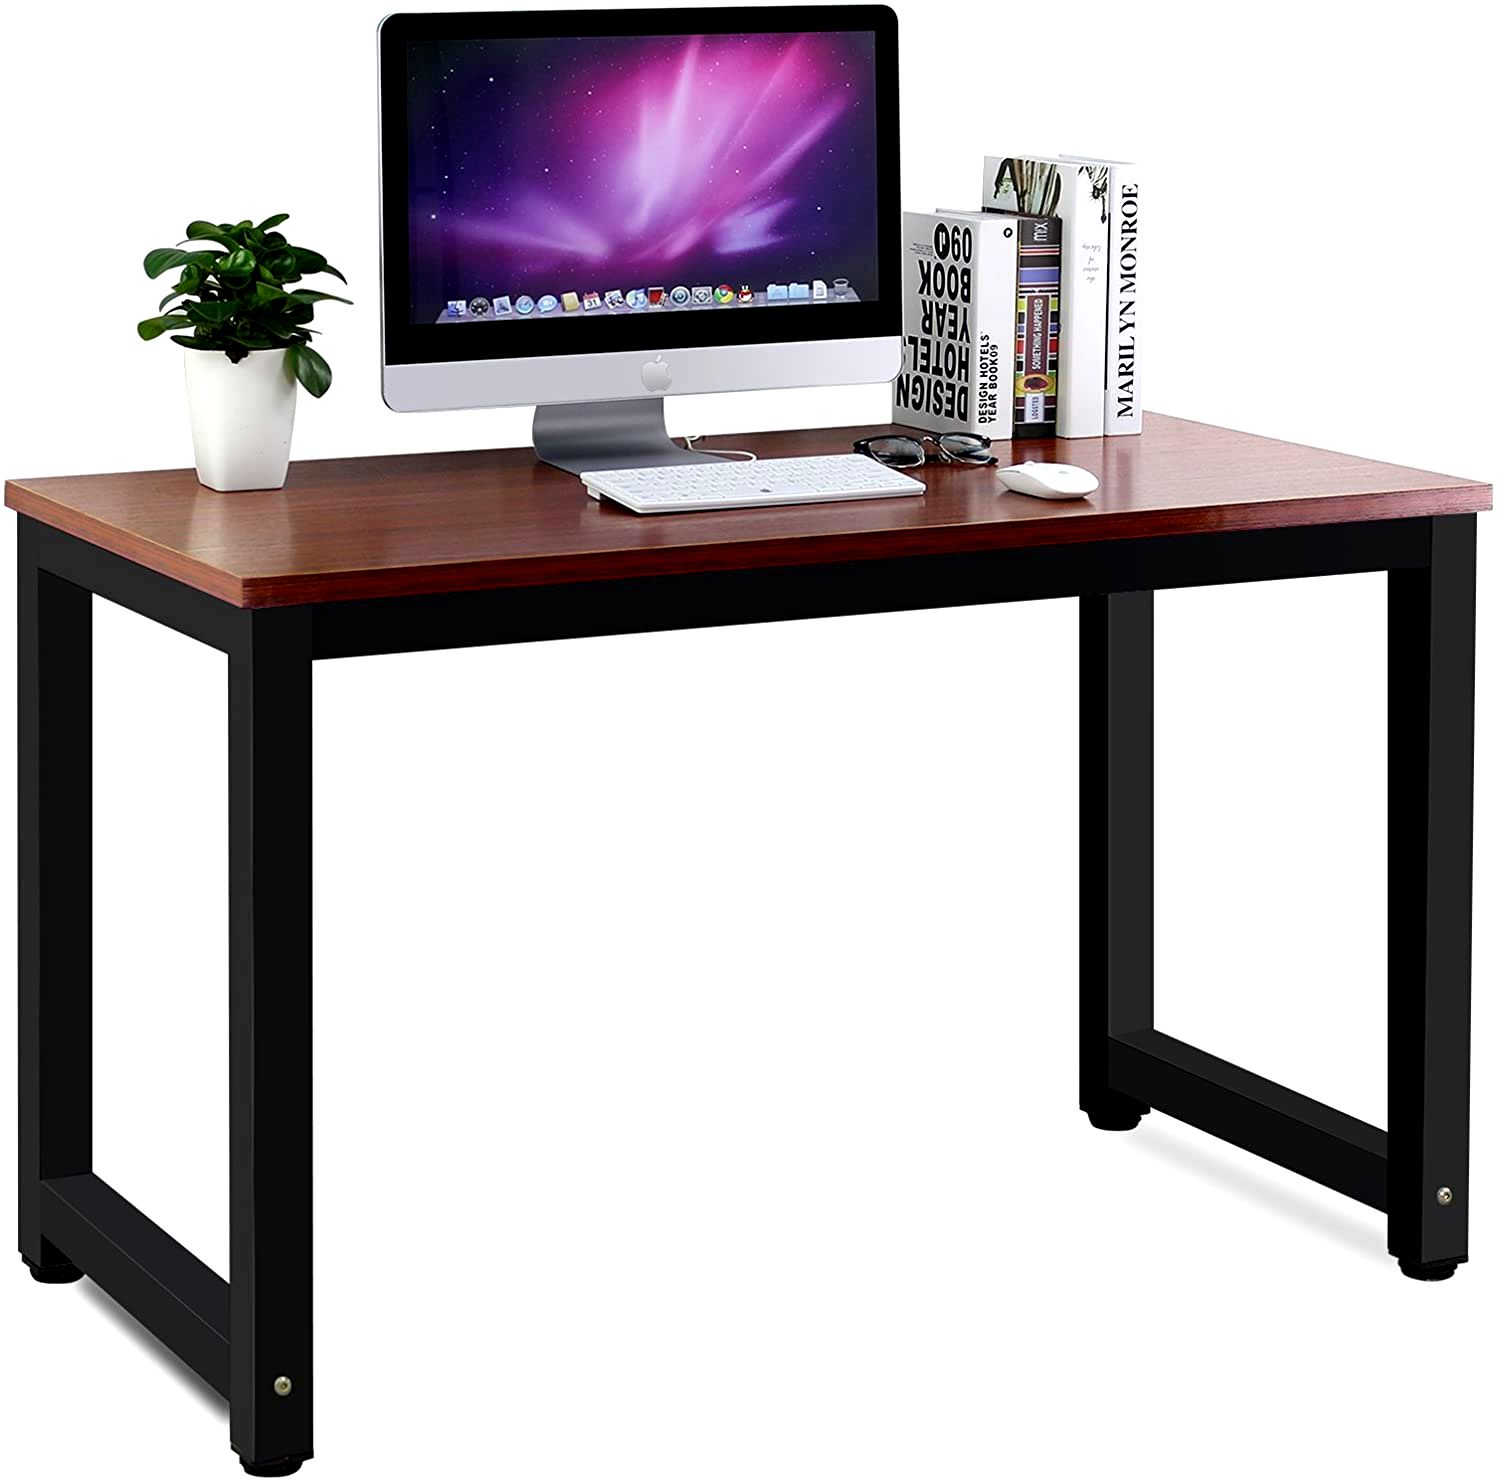 Tribesigns Modern Simple Style Computer Desk